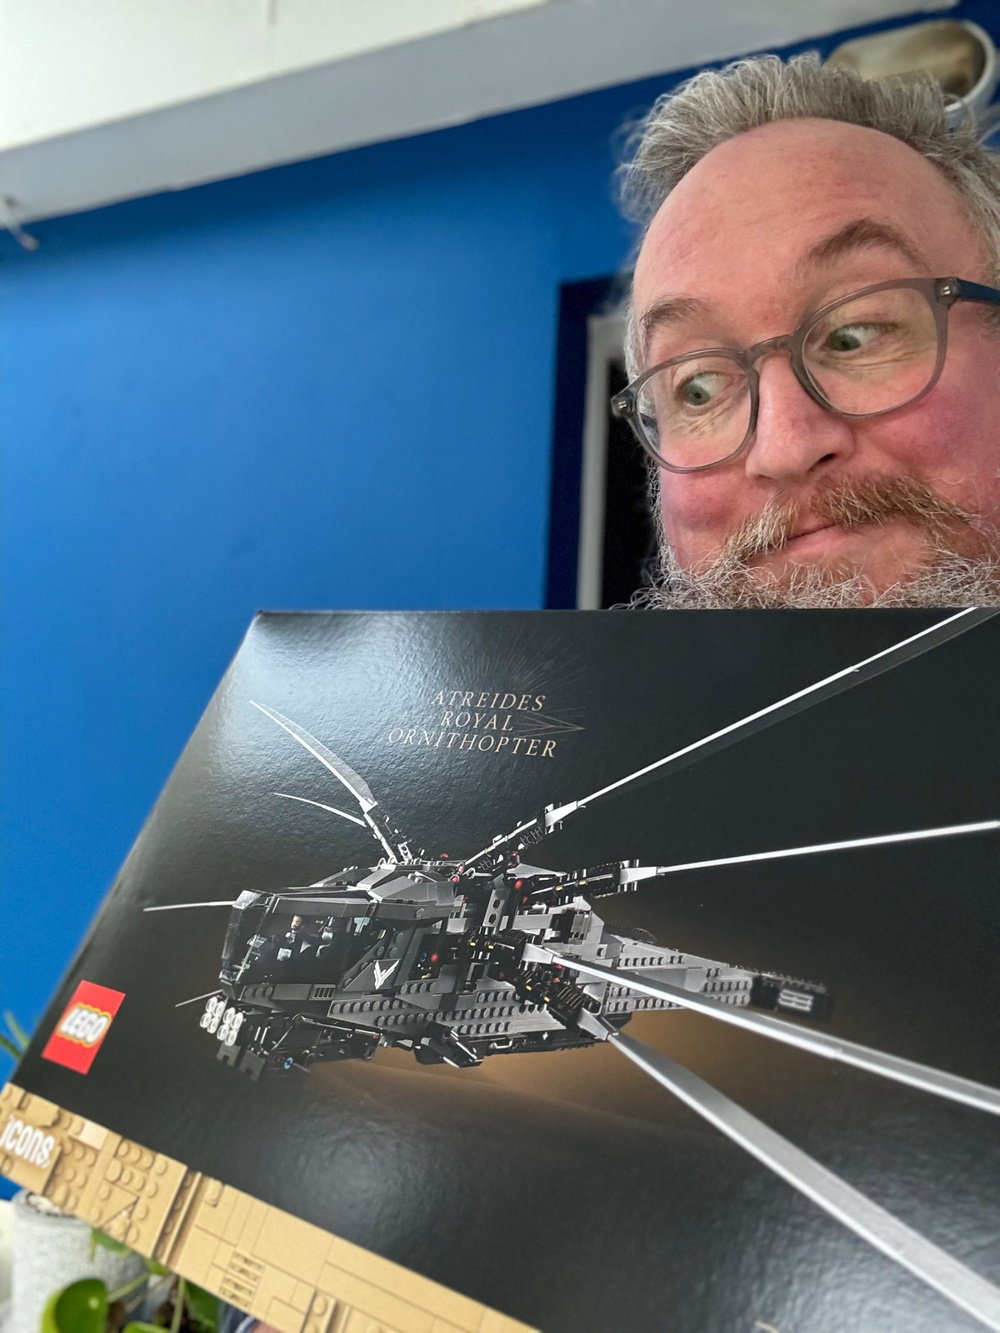 Me holding a LEGO set box featuring the Atreides Royal Ornithopter from the Dune series.